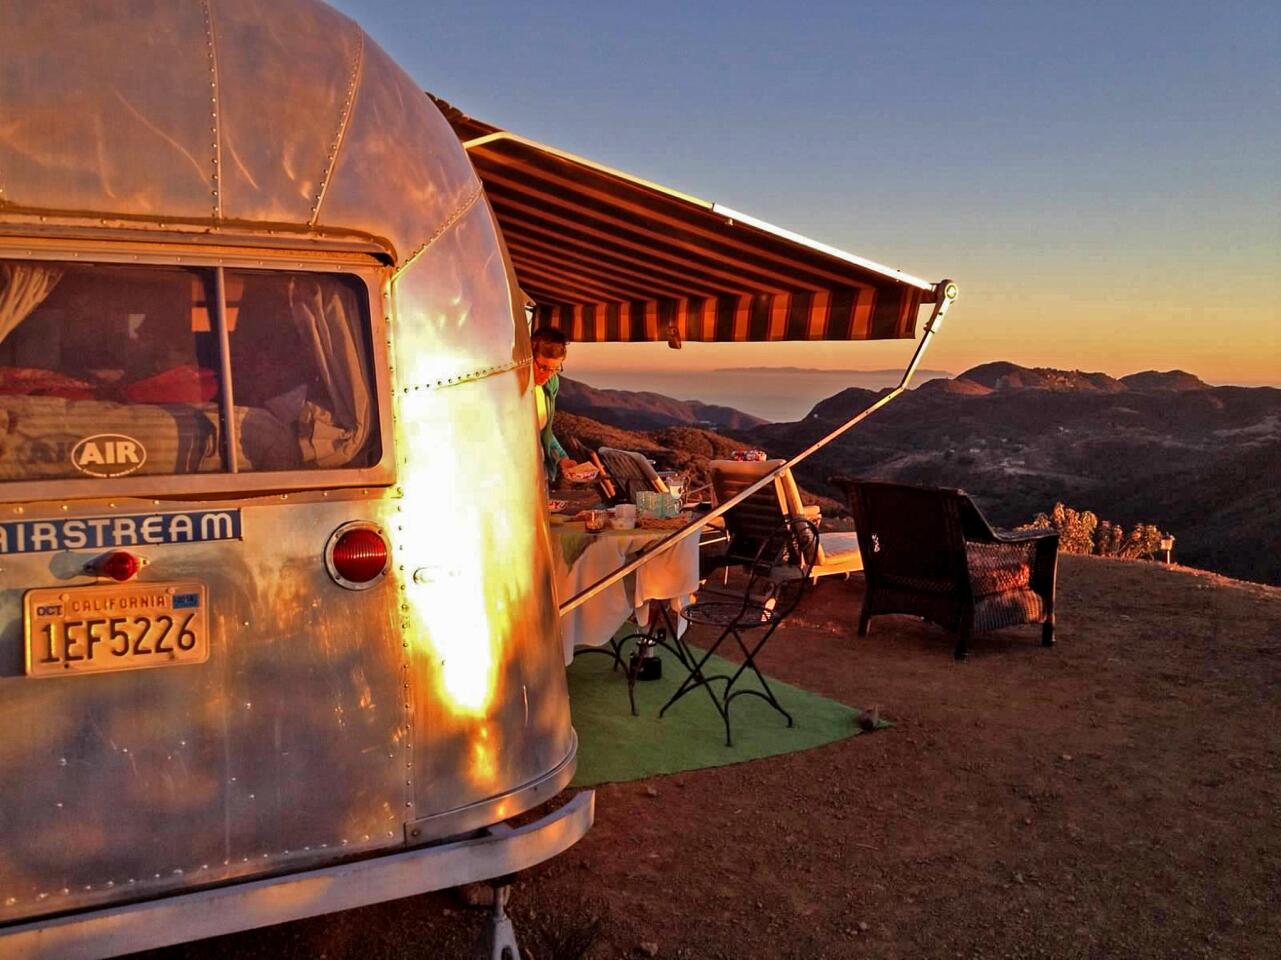 On a plateau next to a shiny 1957 Airstream Flying Cloud with 360-degree views of the Pacific Ocean, we could sit out and watch the Santa Monica Mountains and a giant sapphire sky. There was no one else in sight.